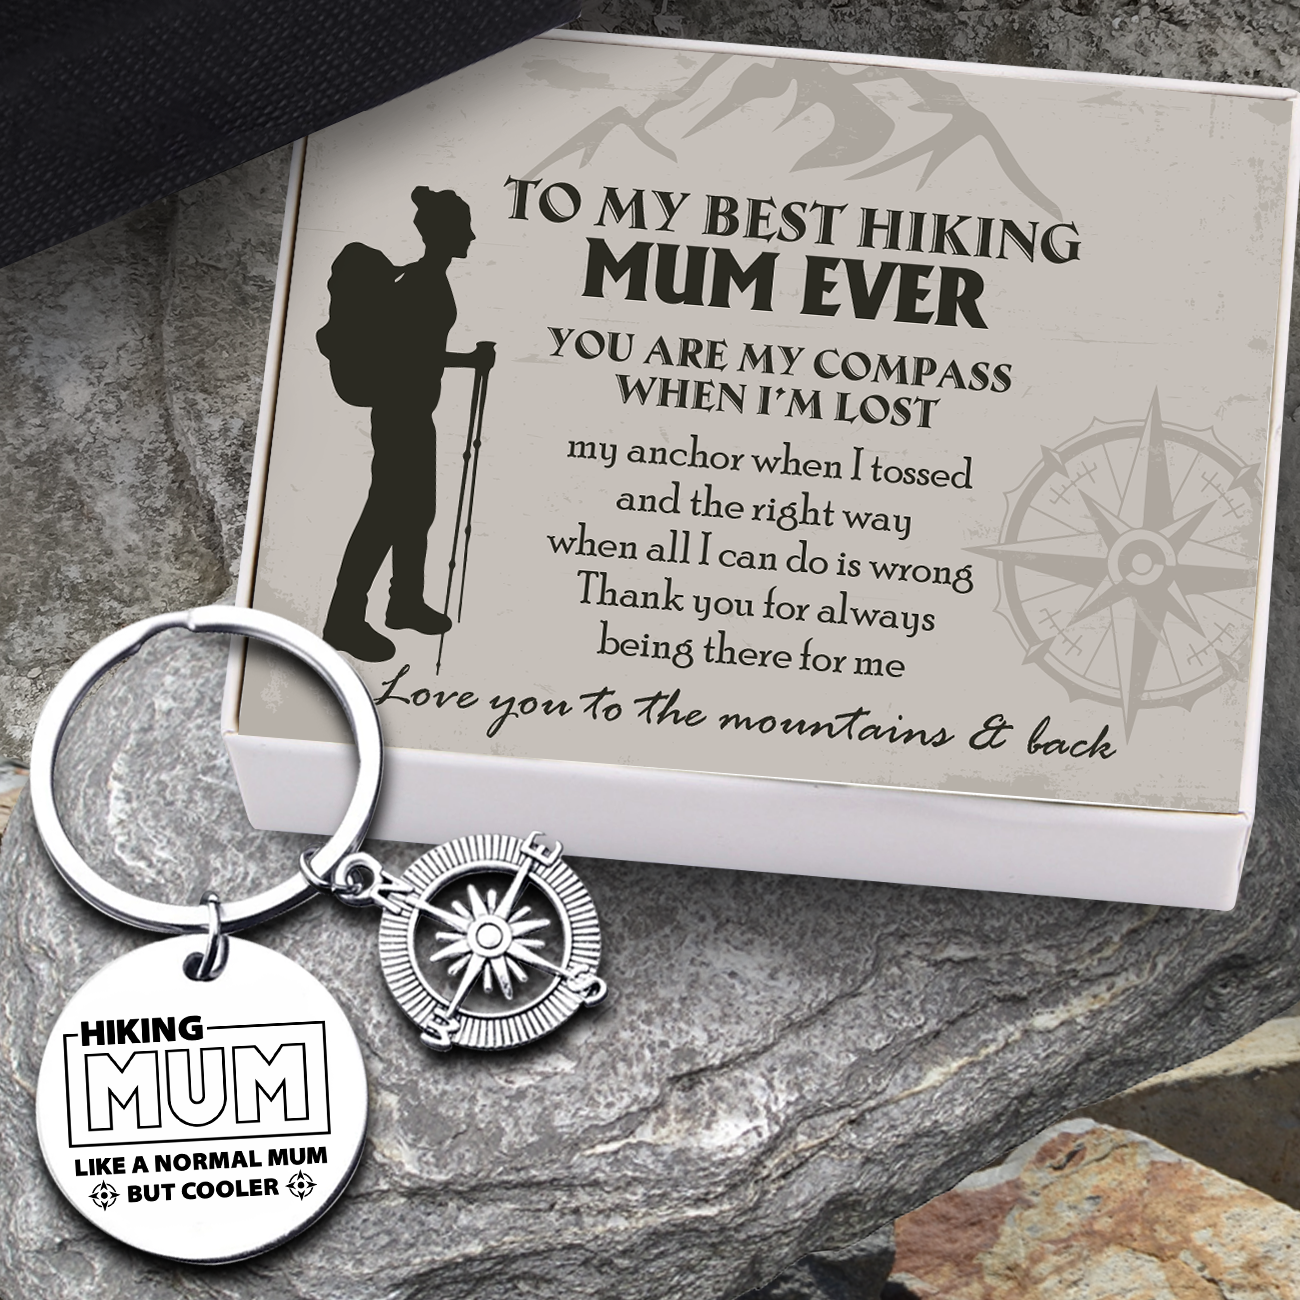 Compass Keychain - Hiking - To My Best Hiking Mum Ever - You Are My Compass When I'm Lost - Ukgkw19001